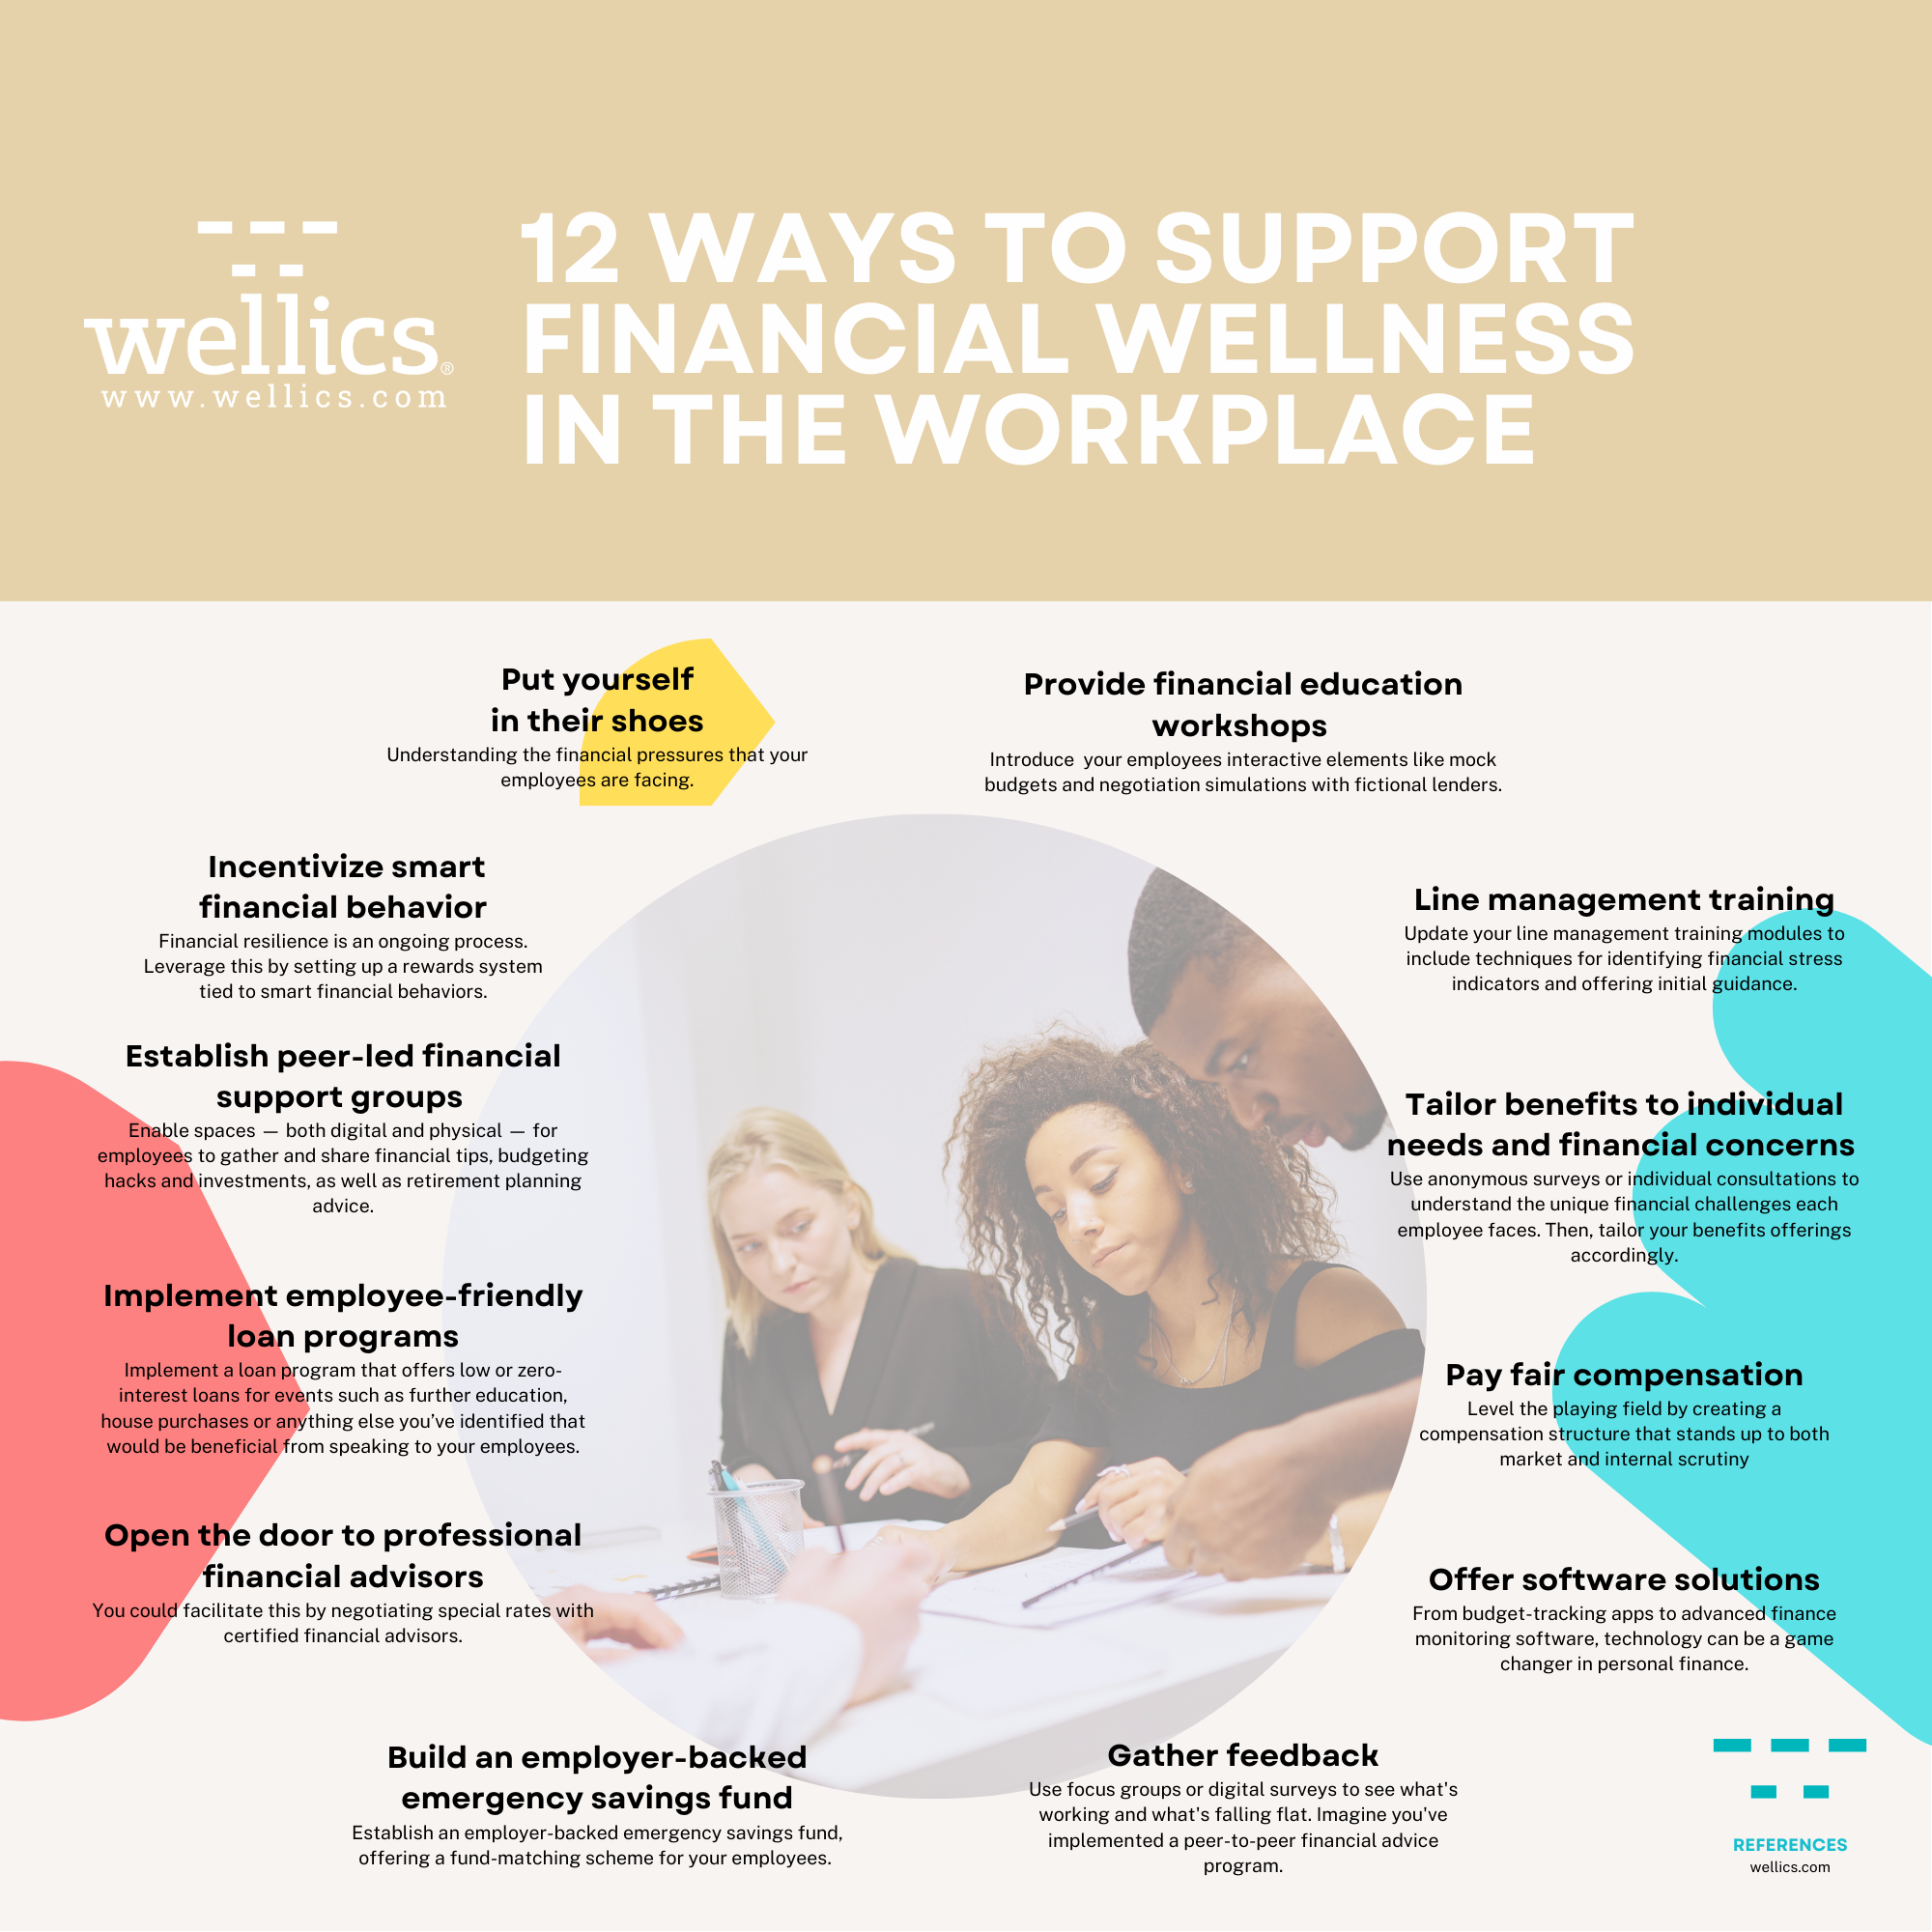 12 Ways To Support Financial Wellness in the Workplace 